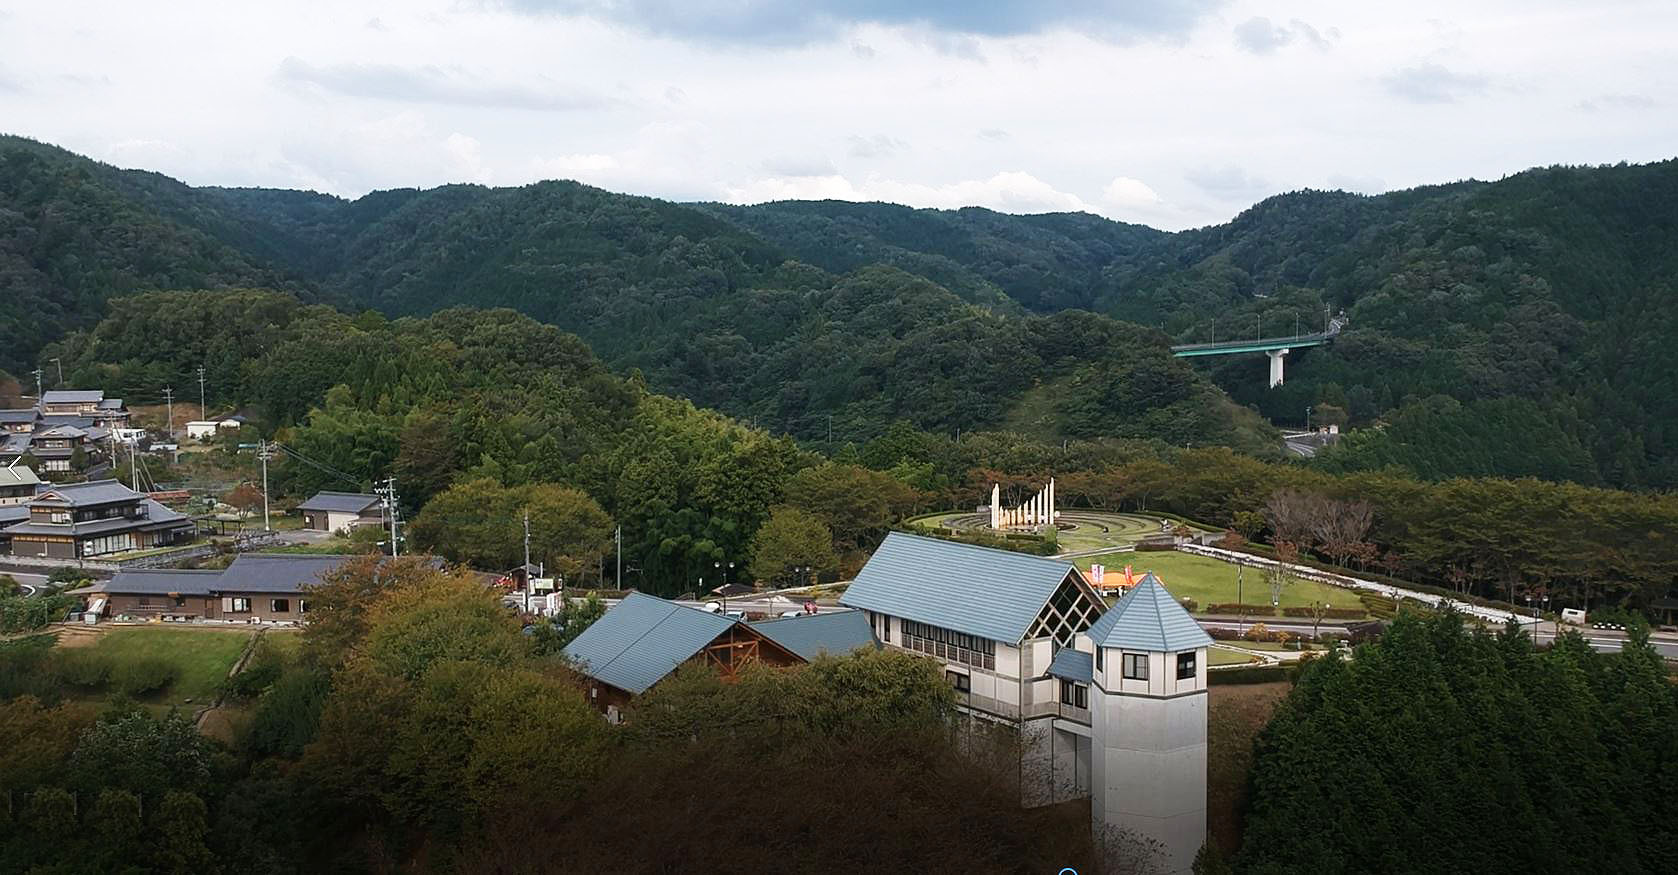 A view to the Chiune Sugihara museum in Gifu district, Japan and the peace monument behind it. (Cnaan Liphshiz)